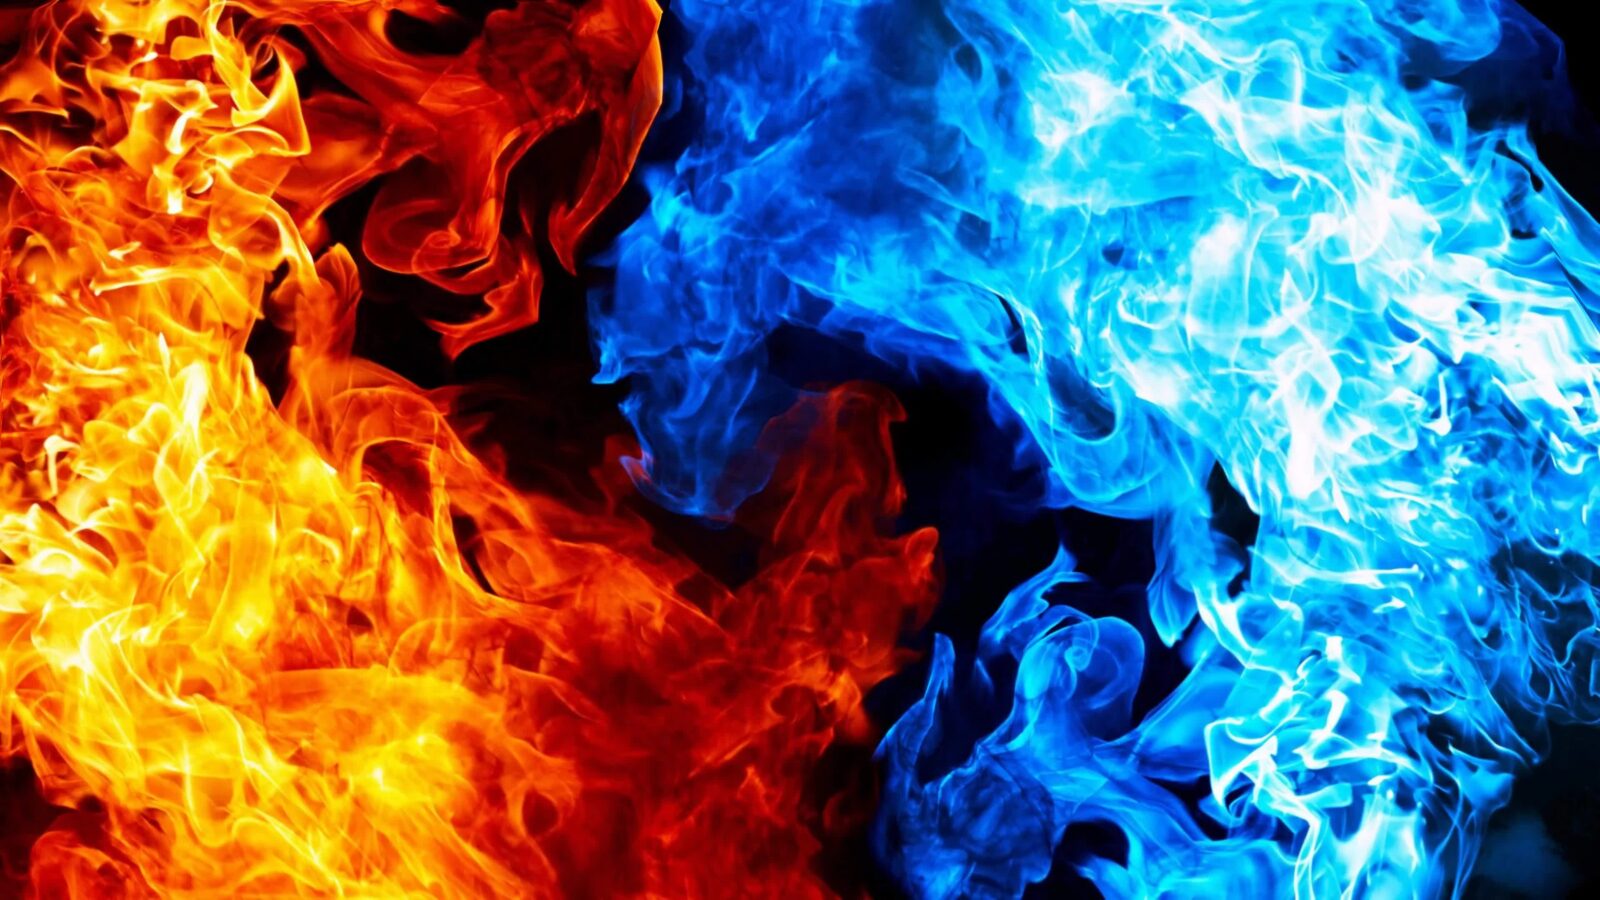 Red Flame and Blue Fire 4K Abstract Artwork - Free Live ...